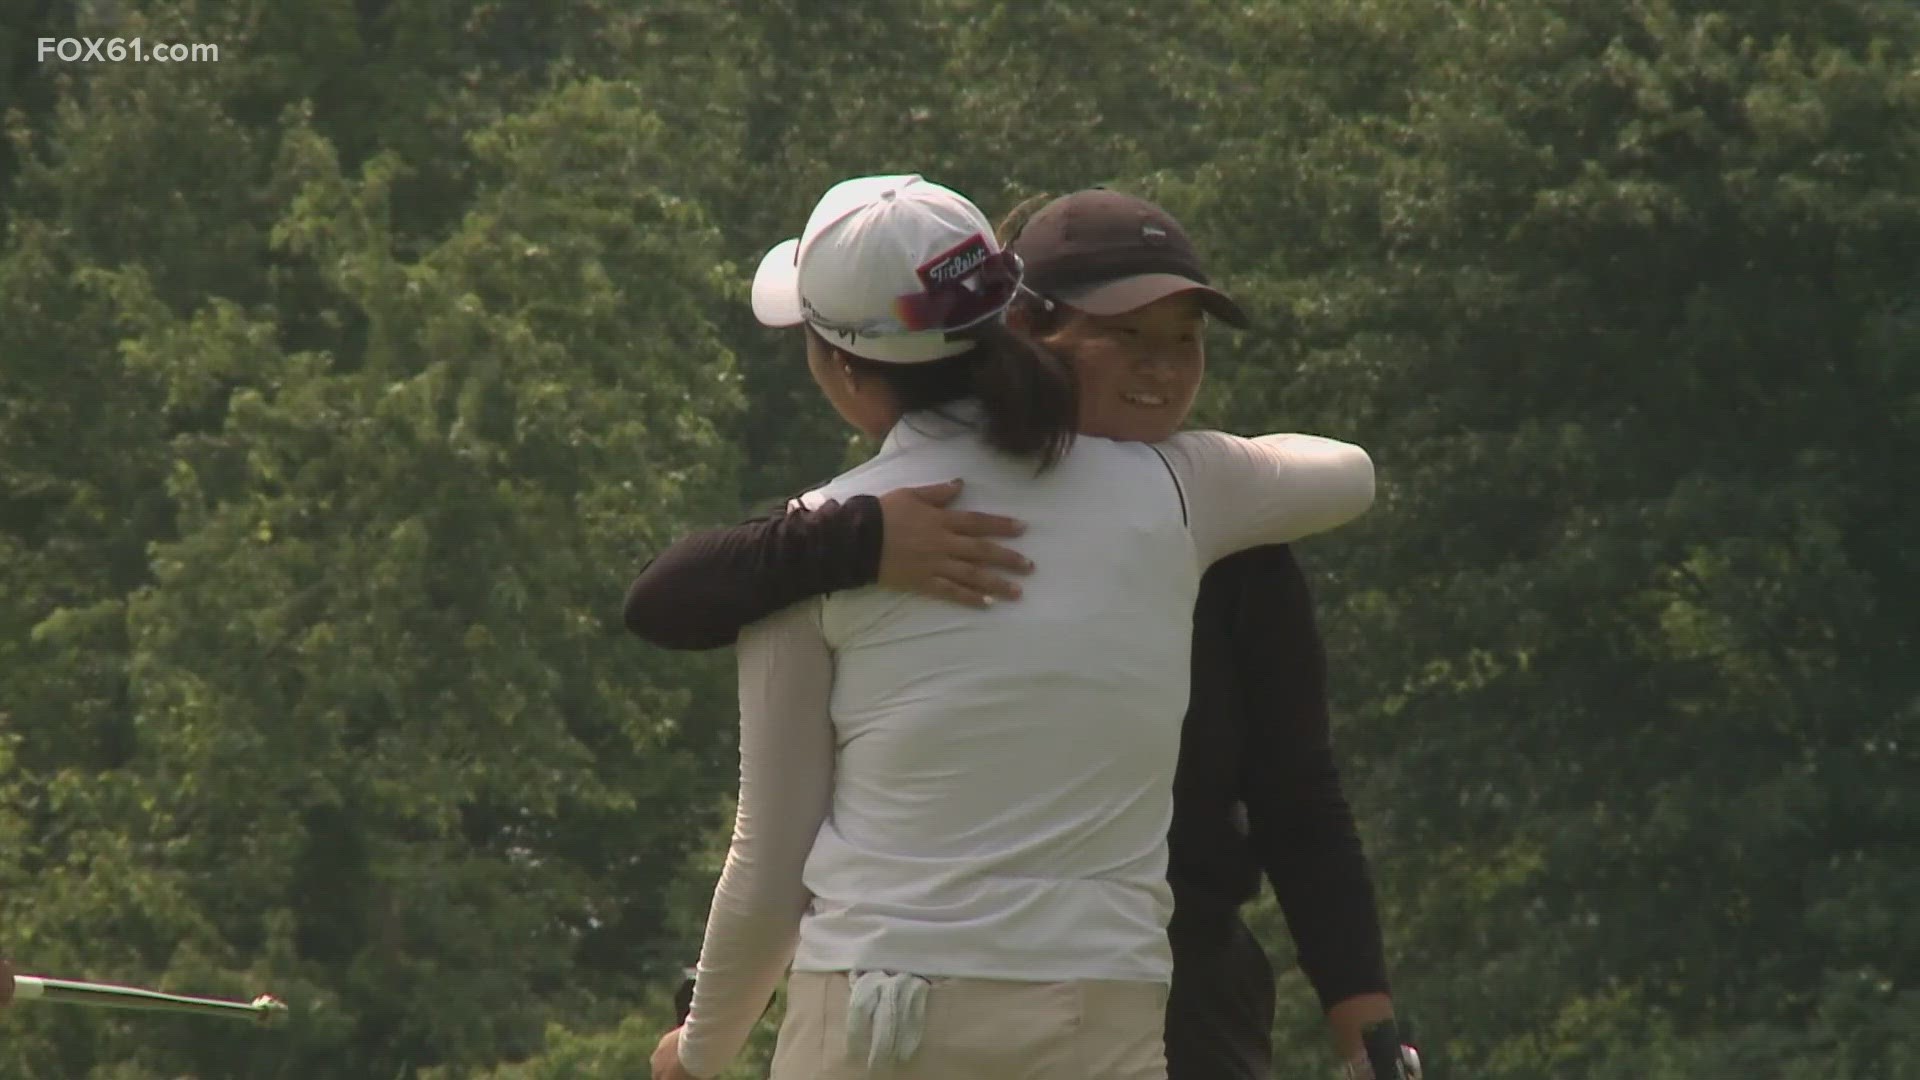 Great River Golf Club in Milford will host the Hartford Healthcare Women's Championship in about three months. Jenny Bae is coming back to defend her title.